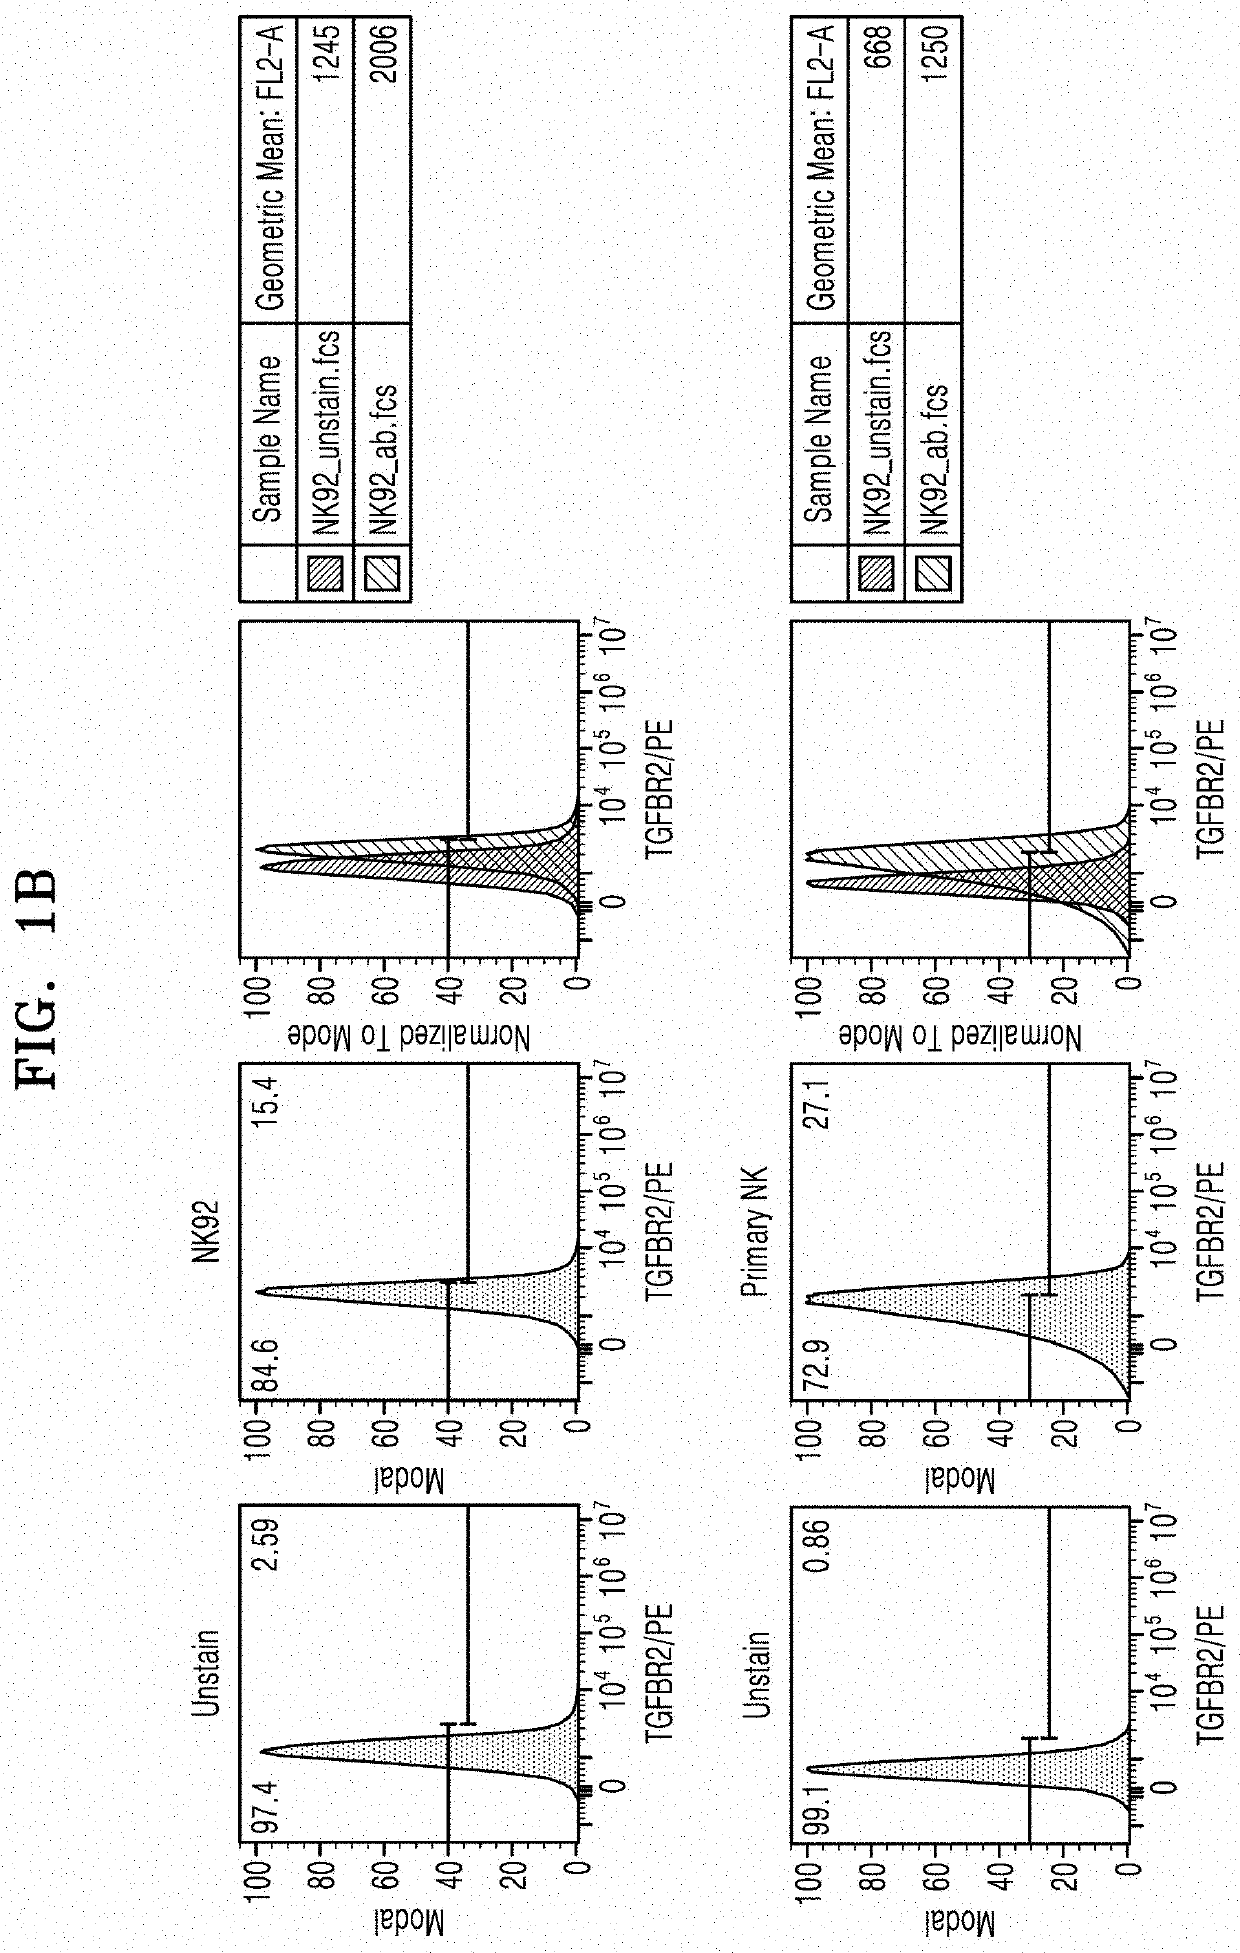 Fusion protein for natural killer cell specific crispr/cas system and use thereof